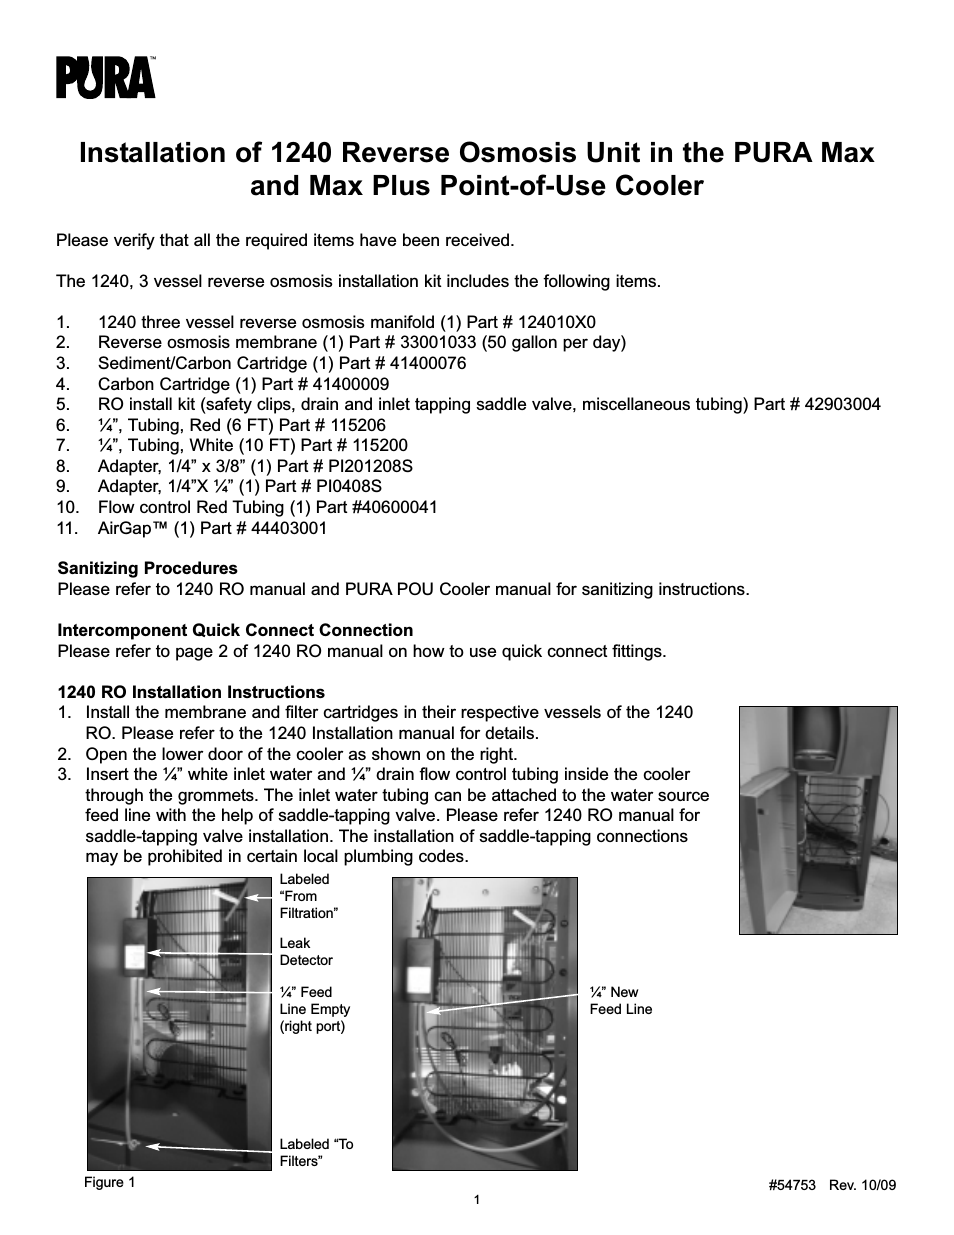 PURA Max and Max Plus Point-of-Use Cooler 1240 Reverse Osmosis Unit Installation Manual